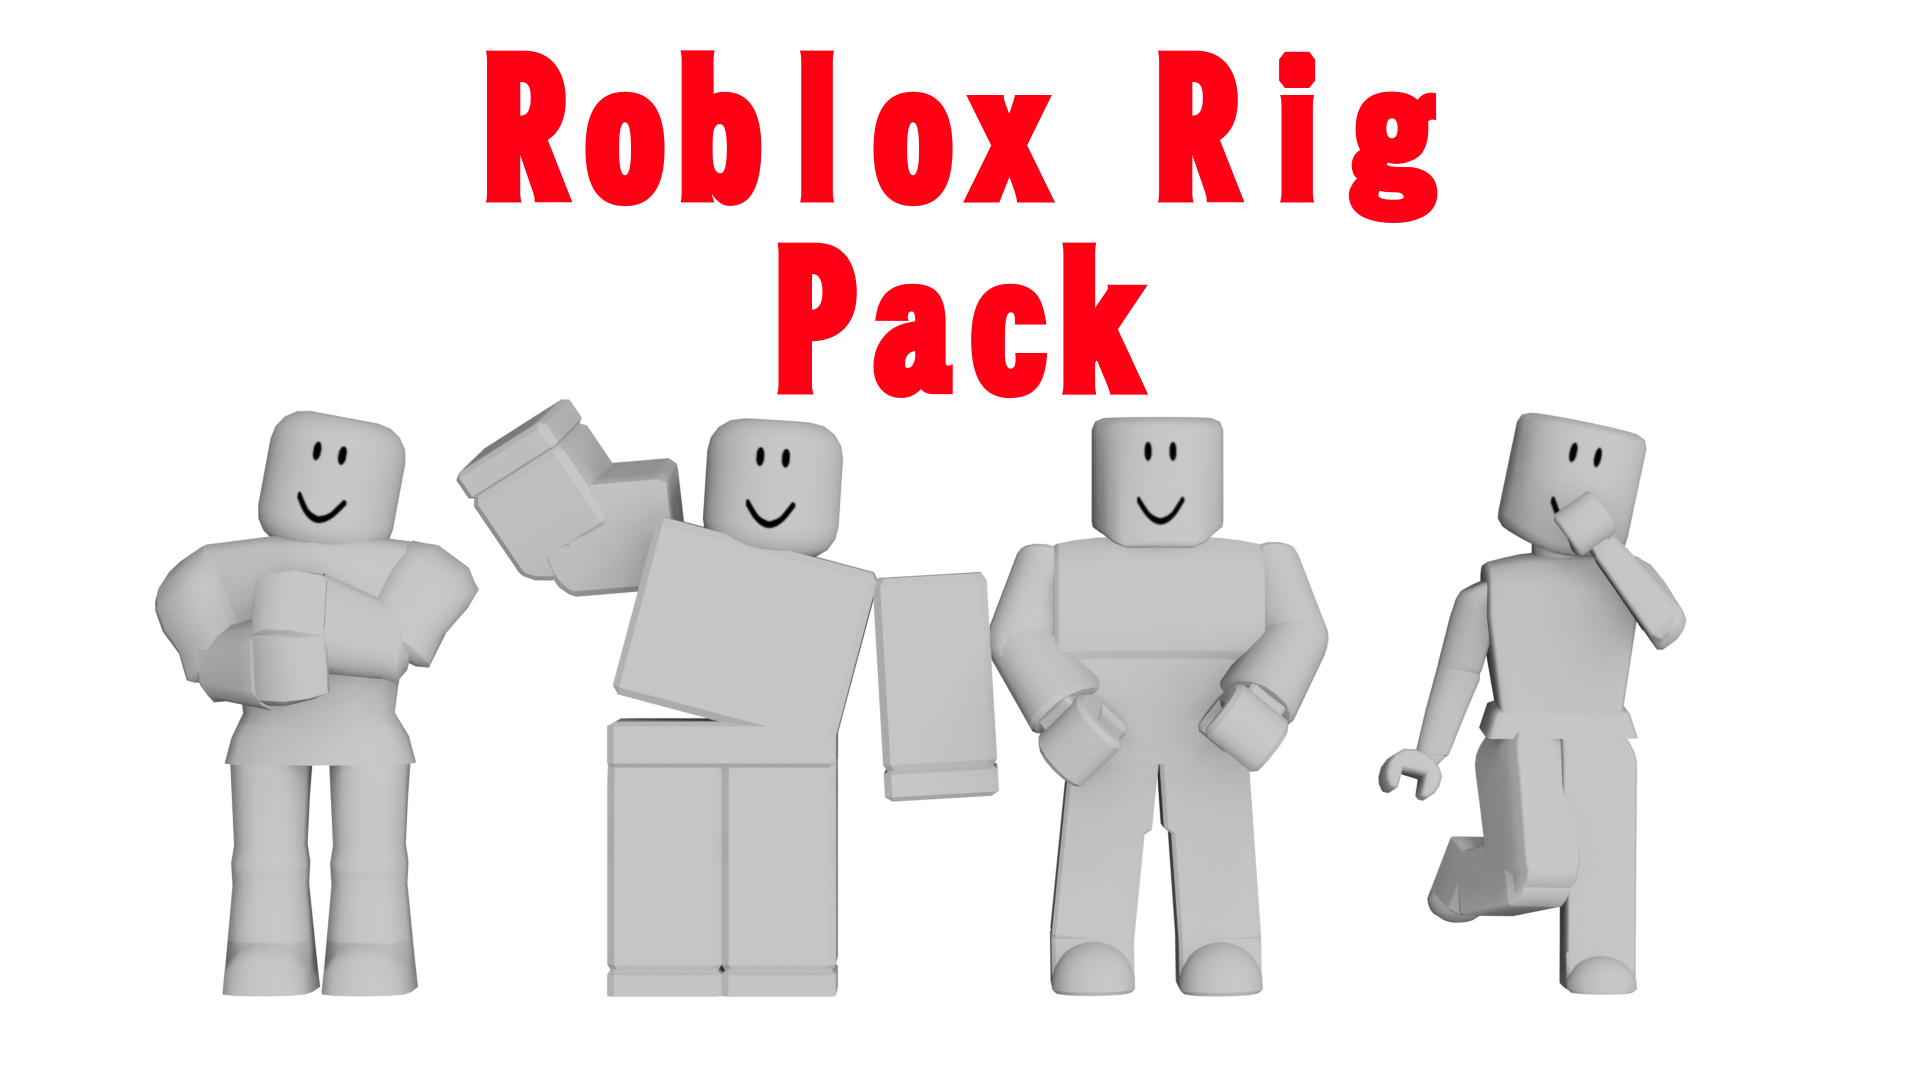 Download Customize Your Roblox Avatar Today